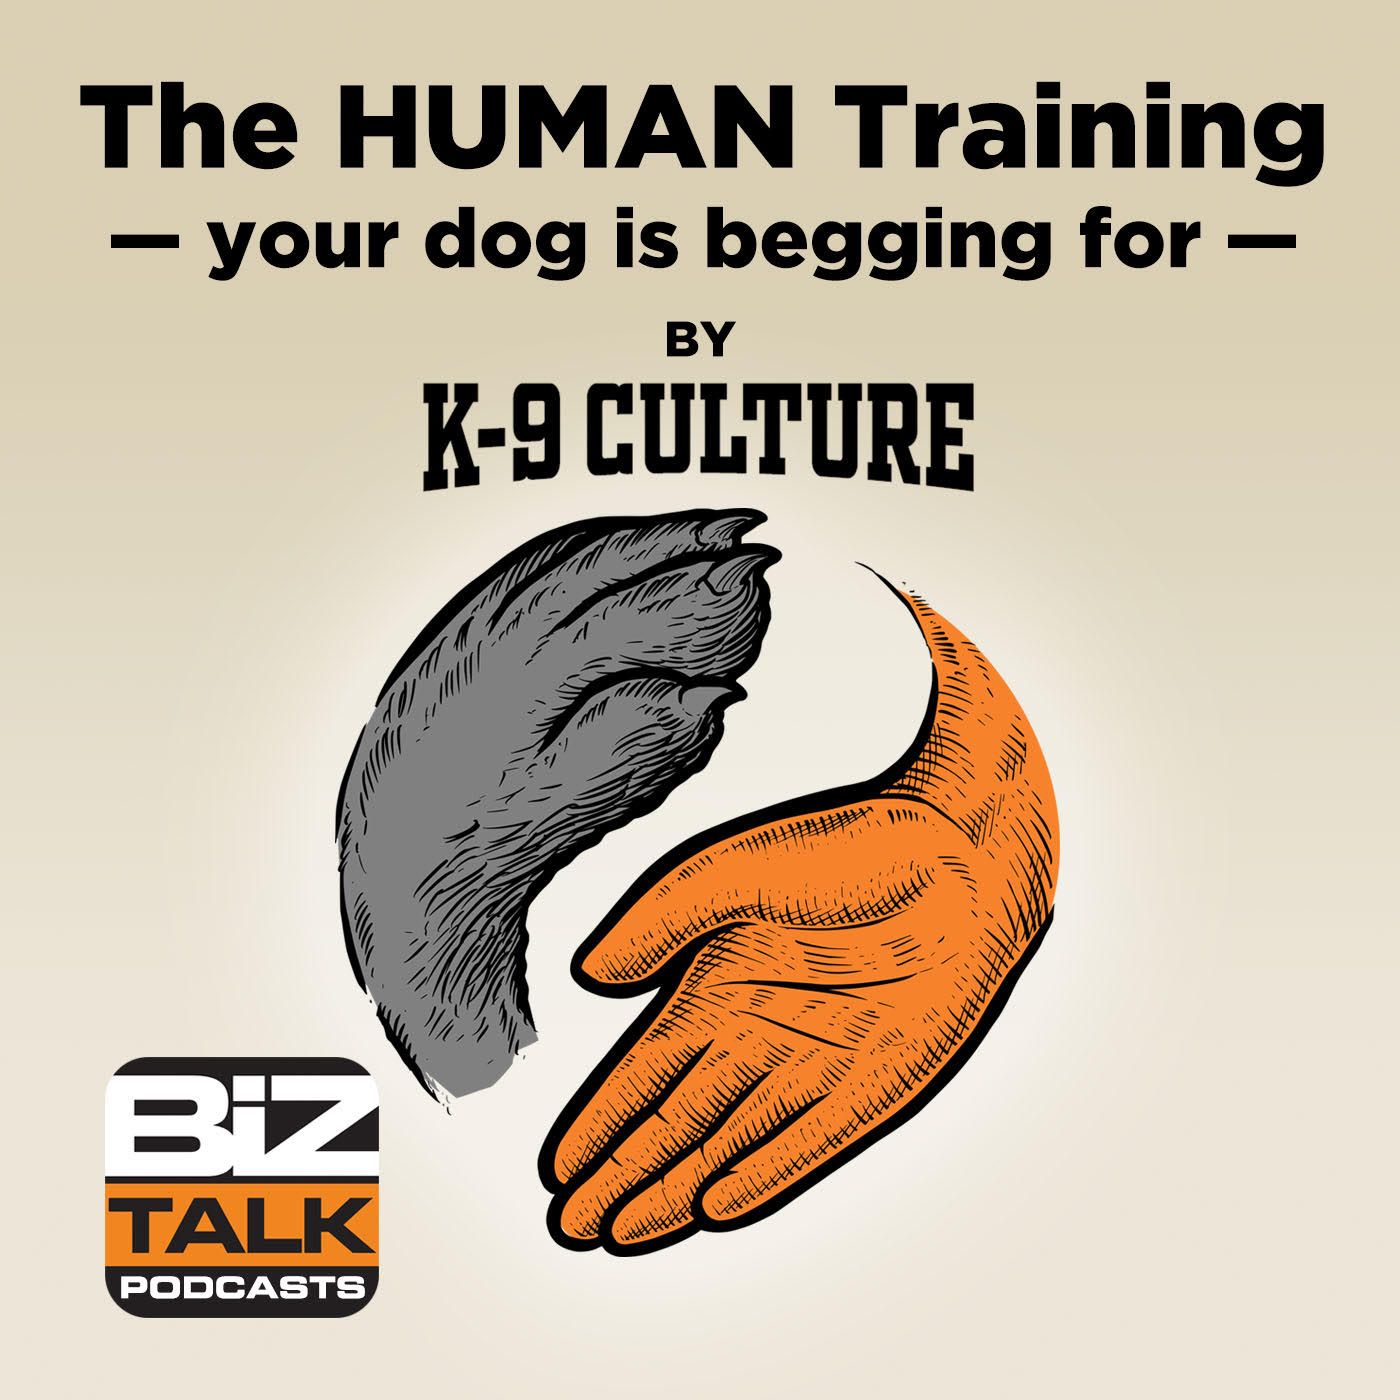 How Do We Ensure K9 Culture Trainers Are Up to Our Standards?